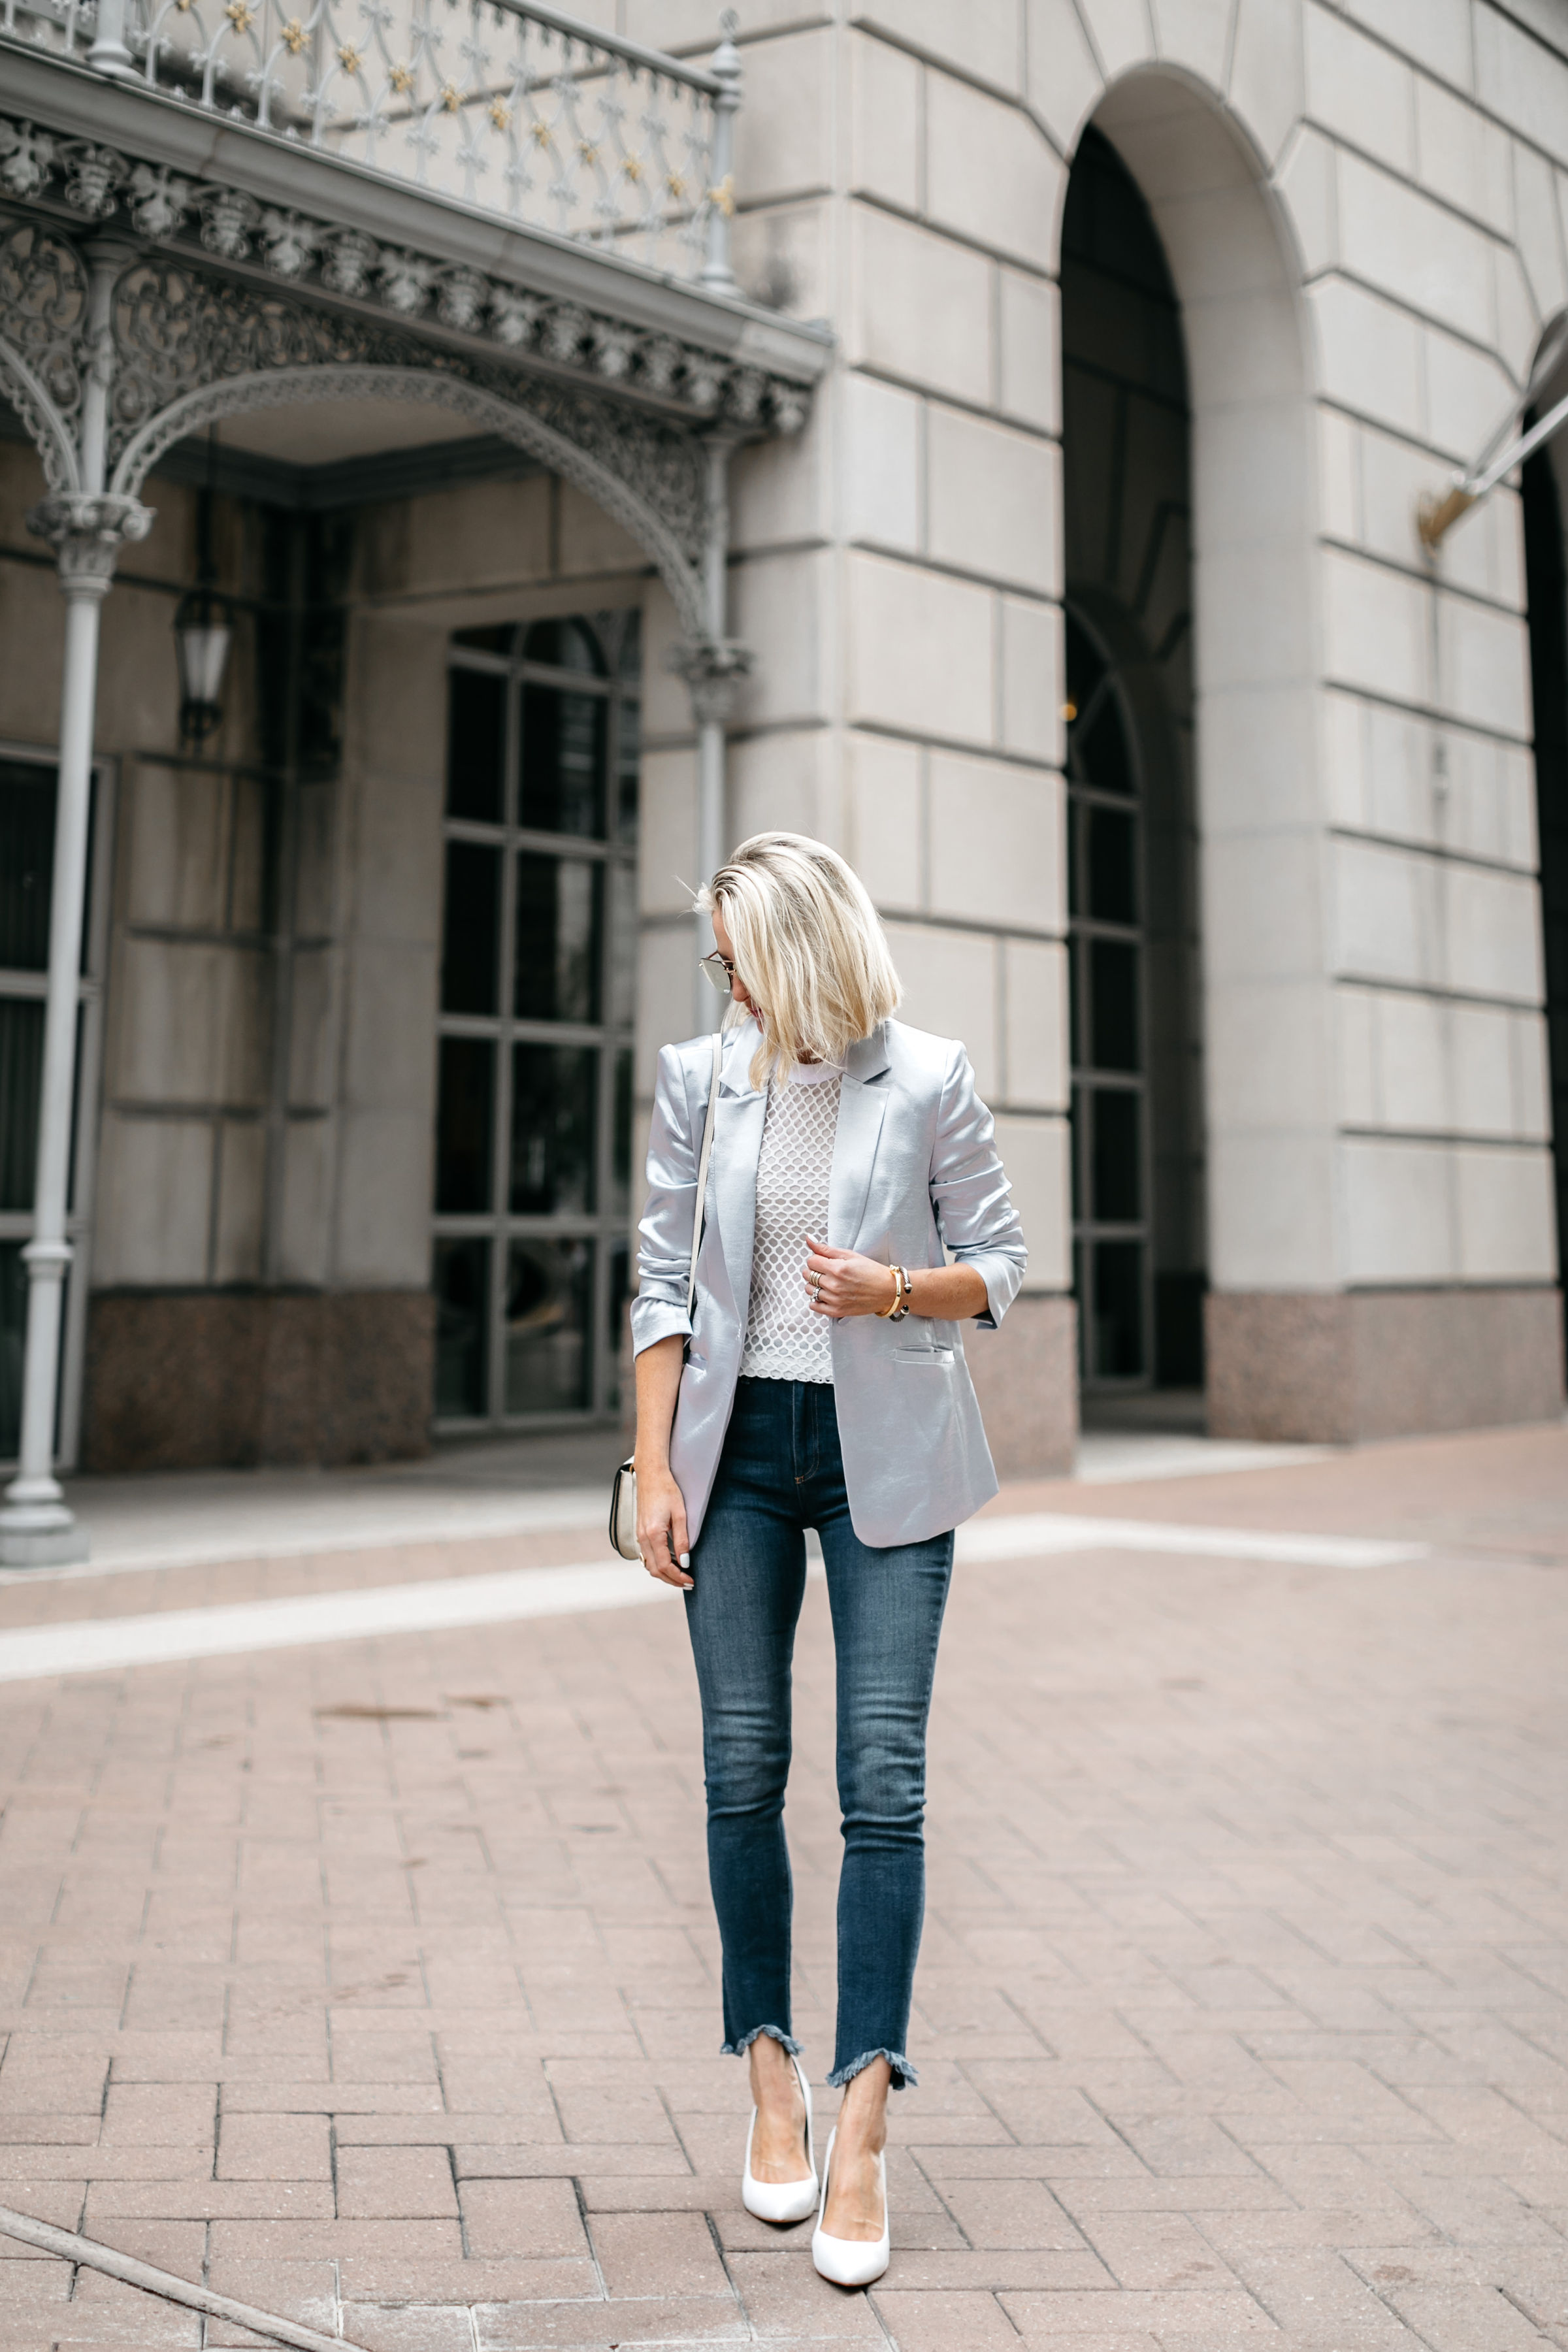 Reward Style Conference 2019, Fashion Blogger Erin Busbee of BusbeeStyle.com wearing Mother jeans, a metallic shiny blazer, and fishnet tee in Dallas, Texas